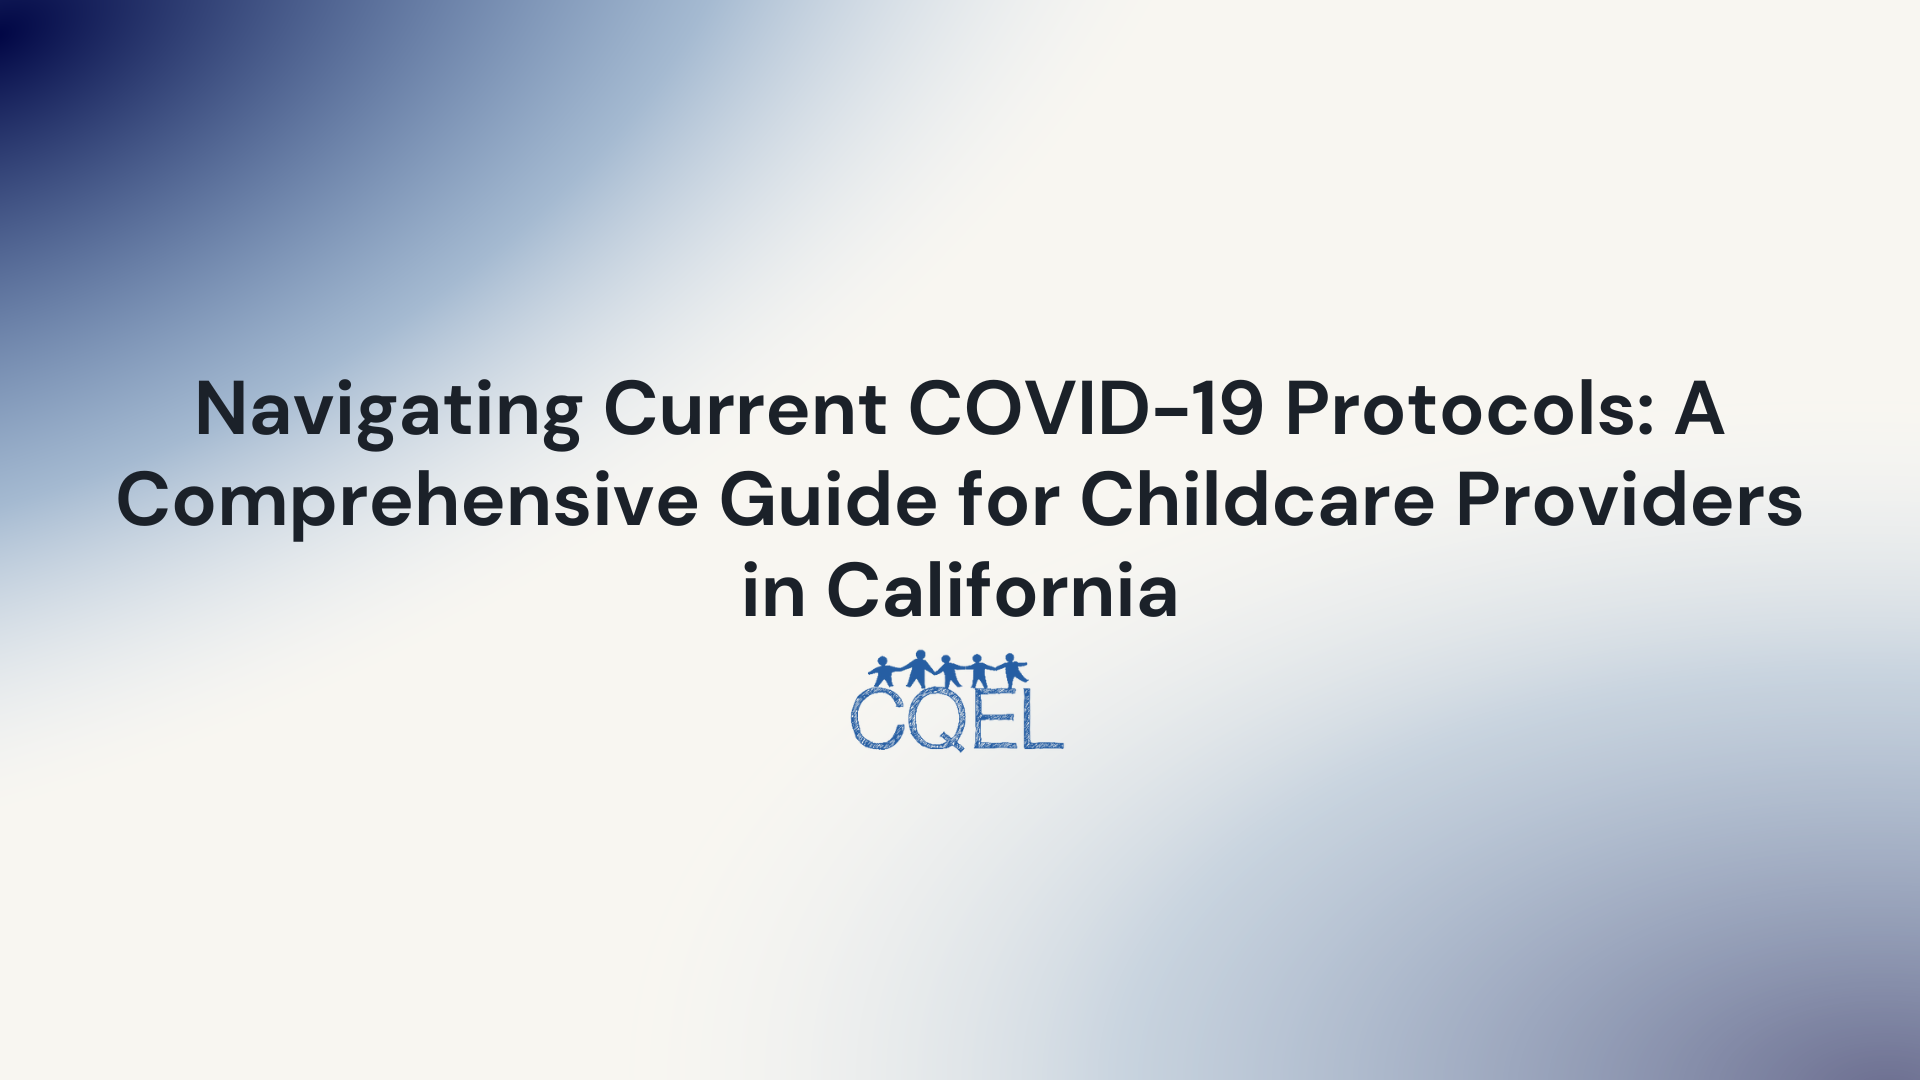 Navigating Current COVID-19 Protocols: A Comprehensive Guide for Childcare Providers in California